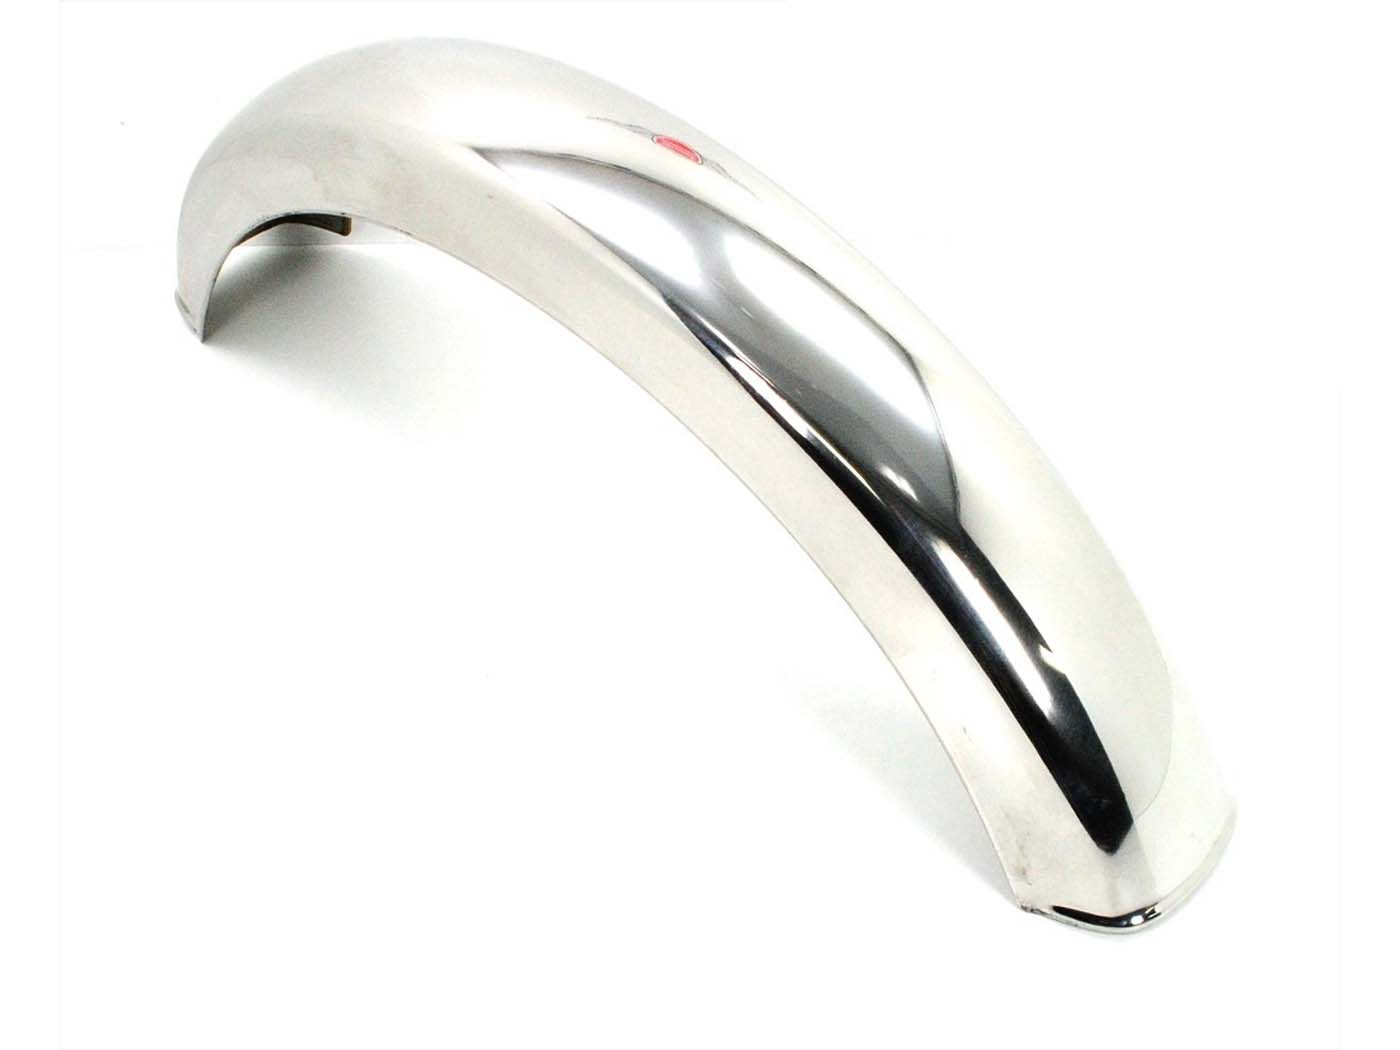 Front Mudguard Chrome For Hercules Prima M P 1 2 3 4 5 6 Moped Moped